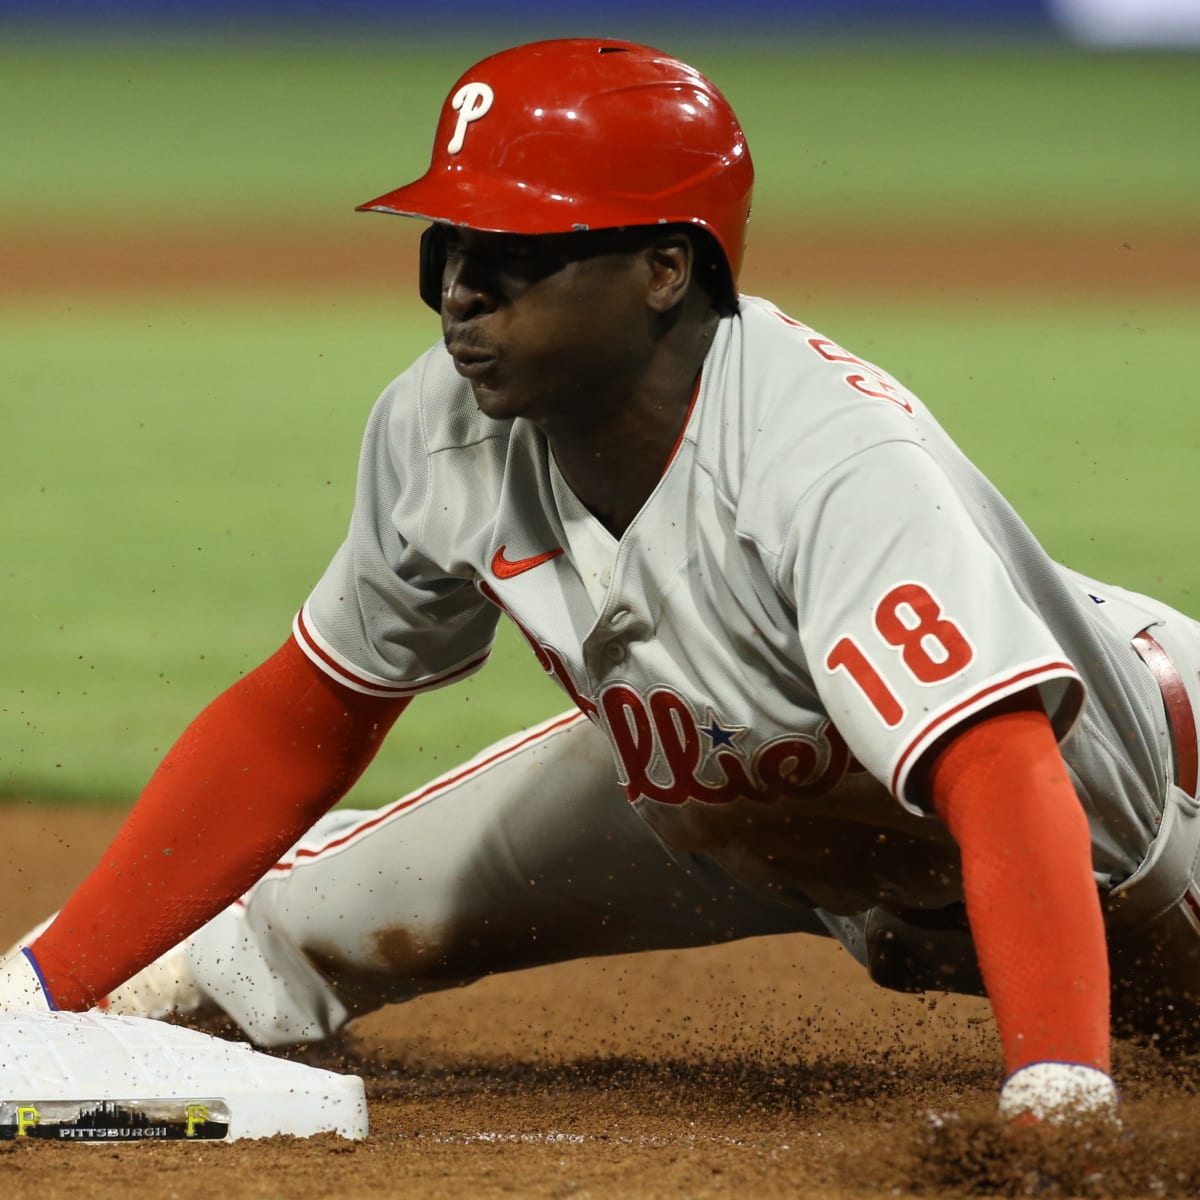 Phillies agree to 1-year deal with SS Didi Gregorius, source says